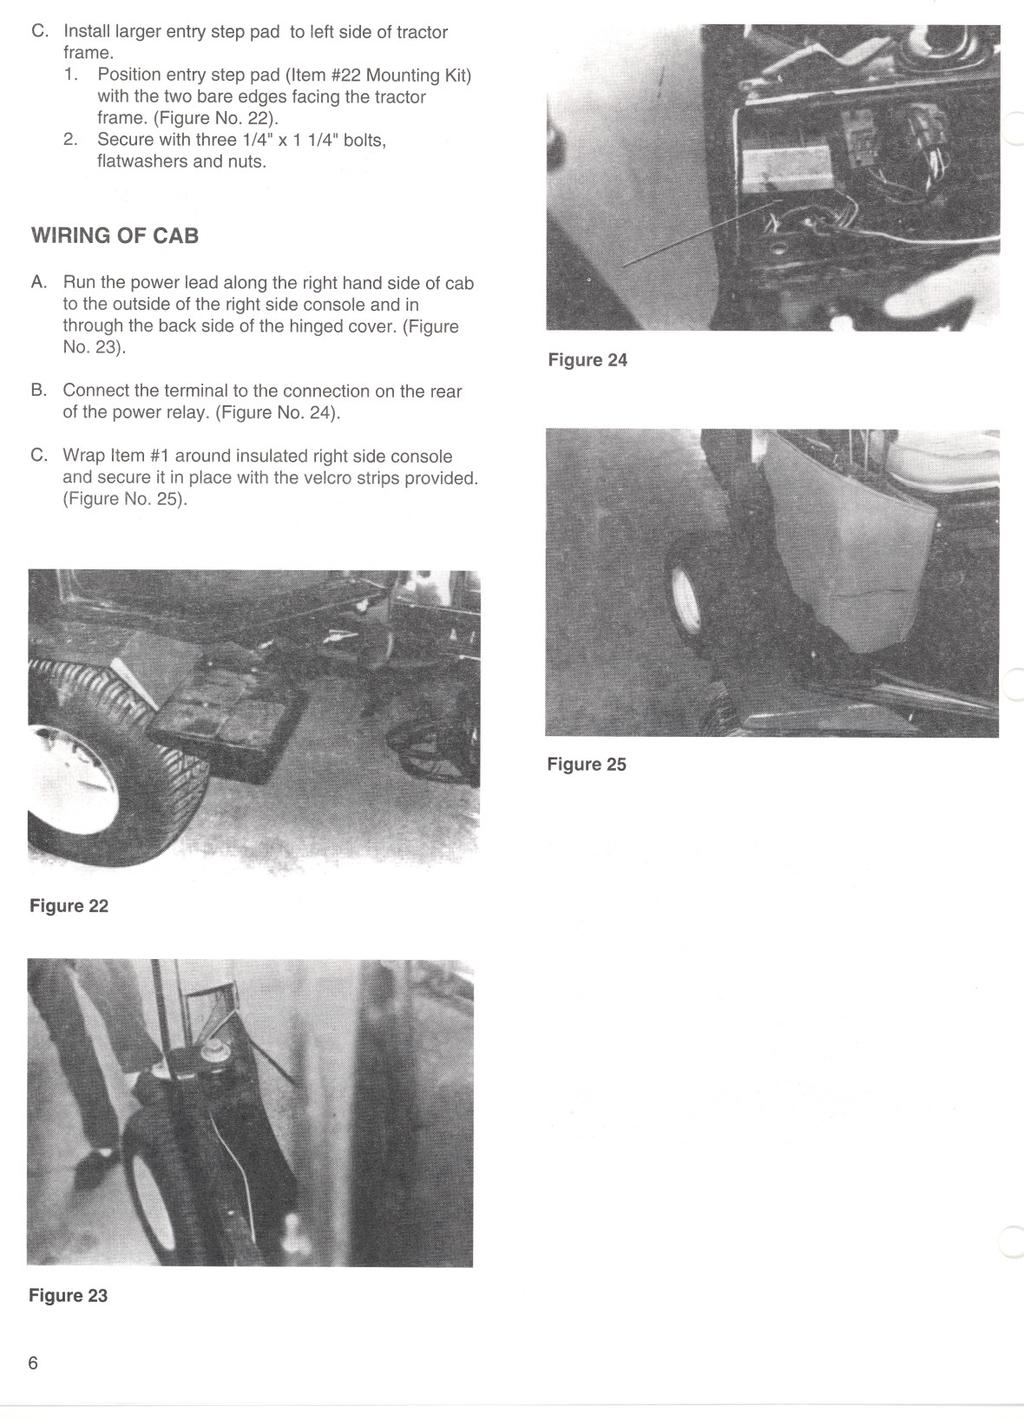 C. Install larger entry step pad to left side of tractor frame.. Position entry step pad (Item # Mounting Kit) with the two bare edges facing the tractor frame. (Figure No. ).